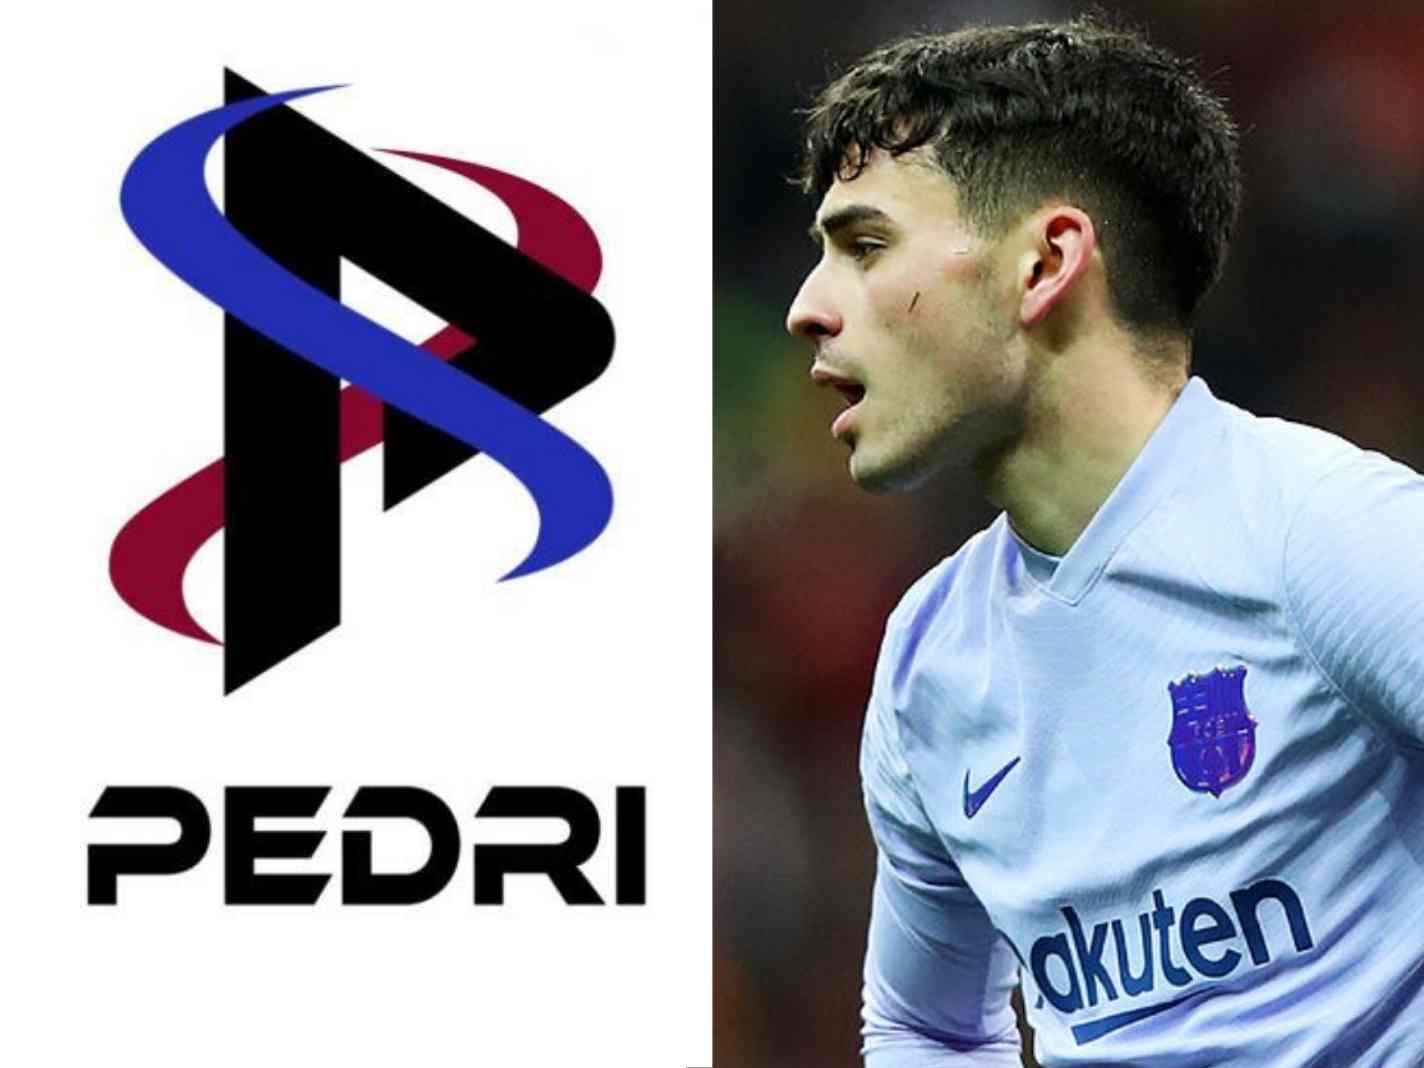 The image shows Pedri on the right and his new logo on the left.